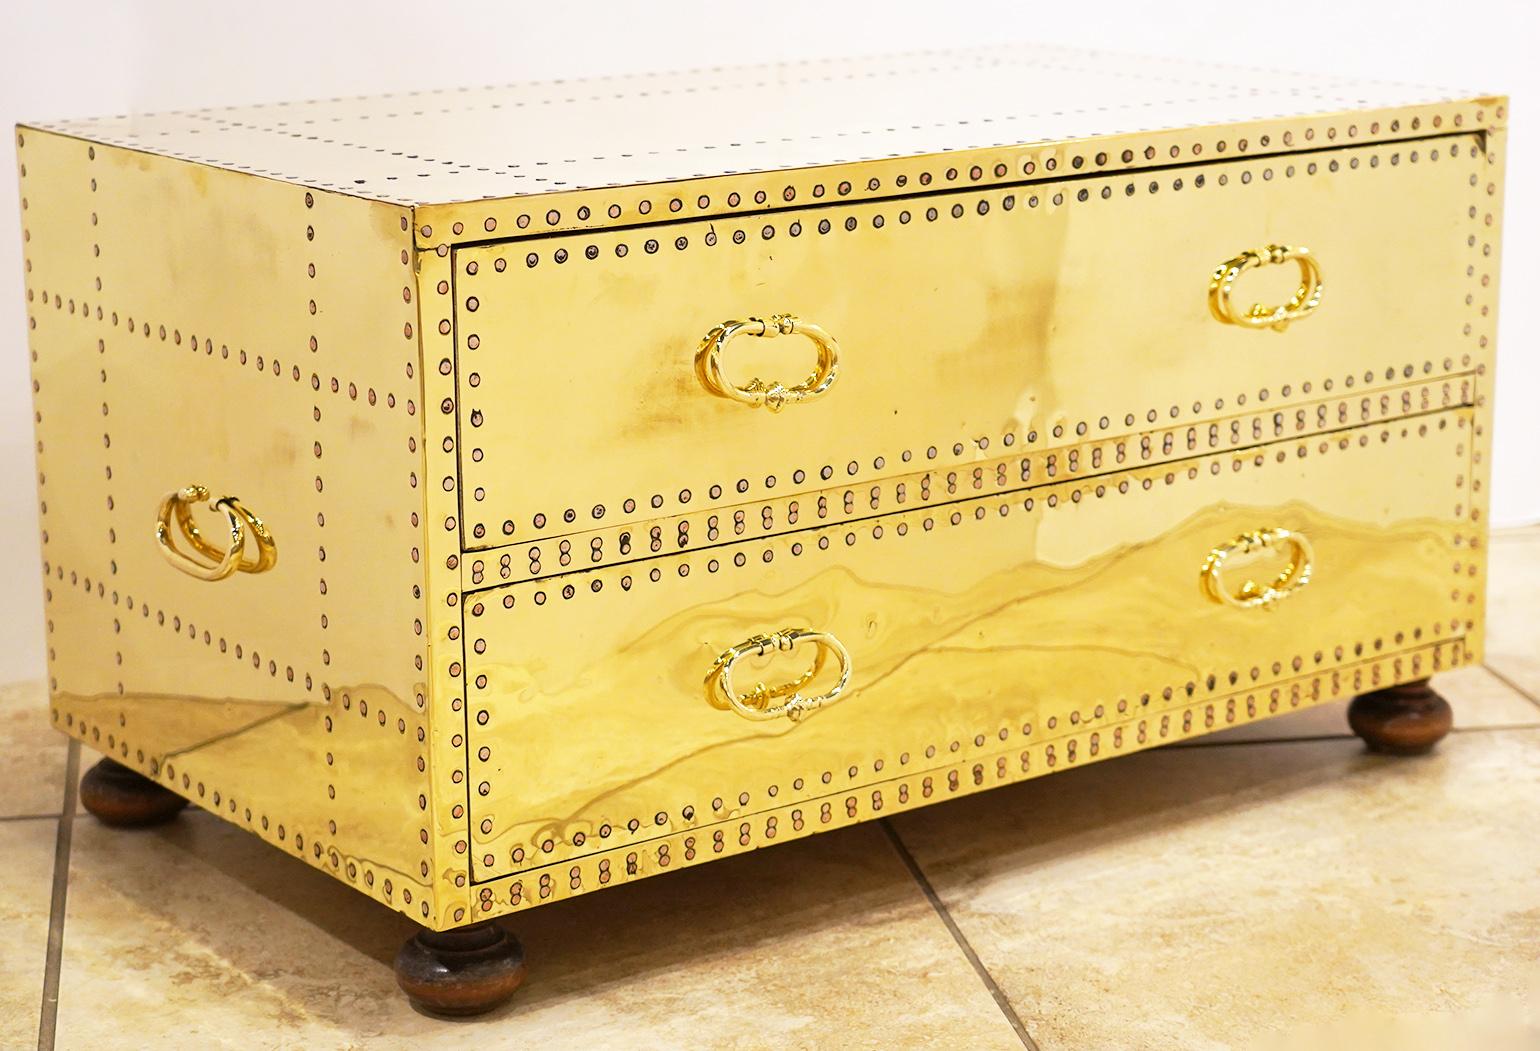 A pair of spectacular polished brass clad and copper nail studded 2-drawer chest on turned wood feet by Sarreid, Ltd. The chests have been recently professionally polished and clear coated. Made in Spain in the 1970s and in excellent condition.